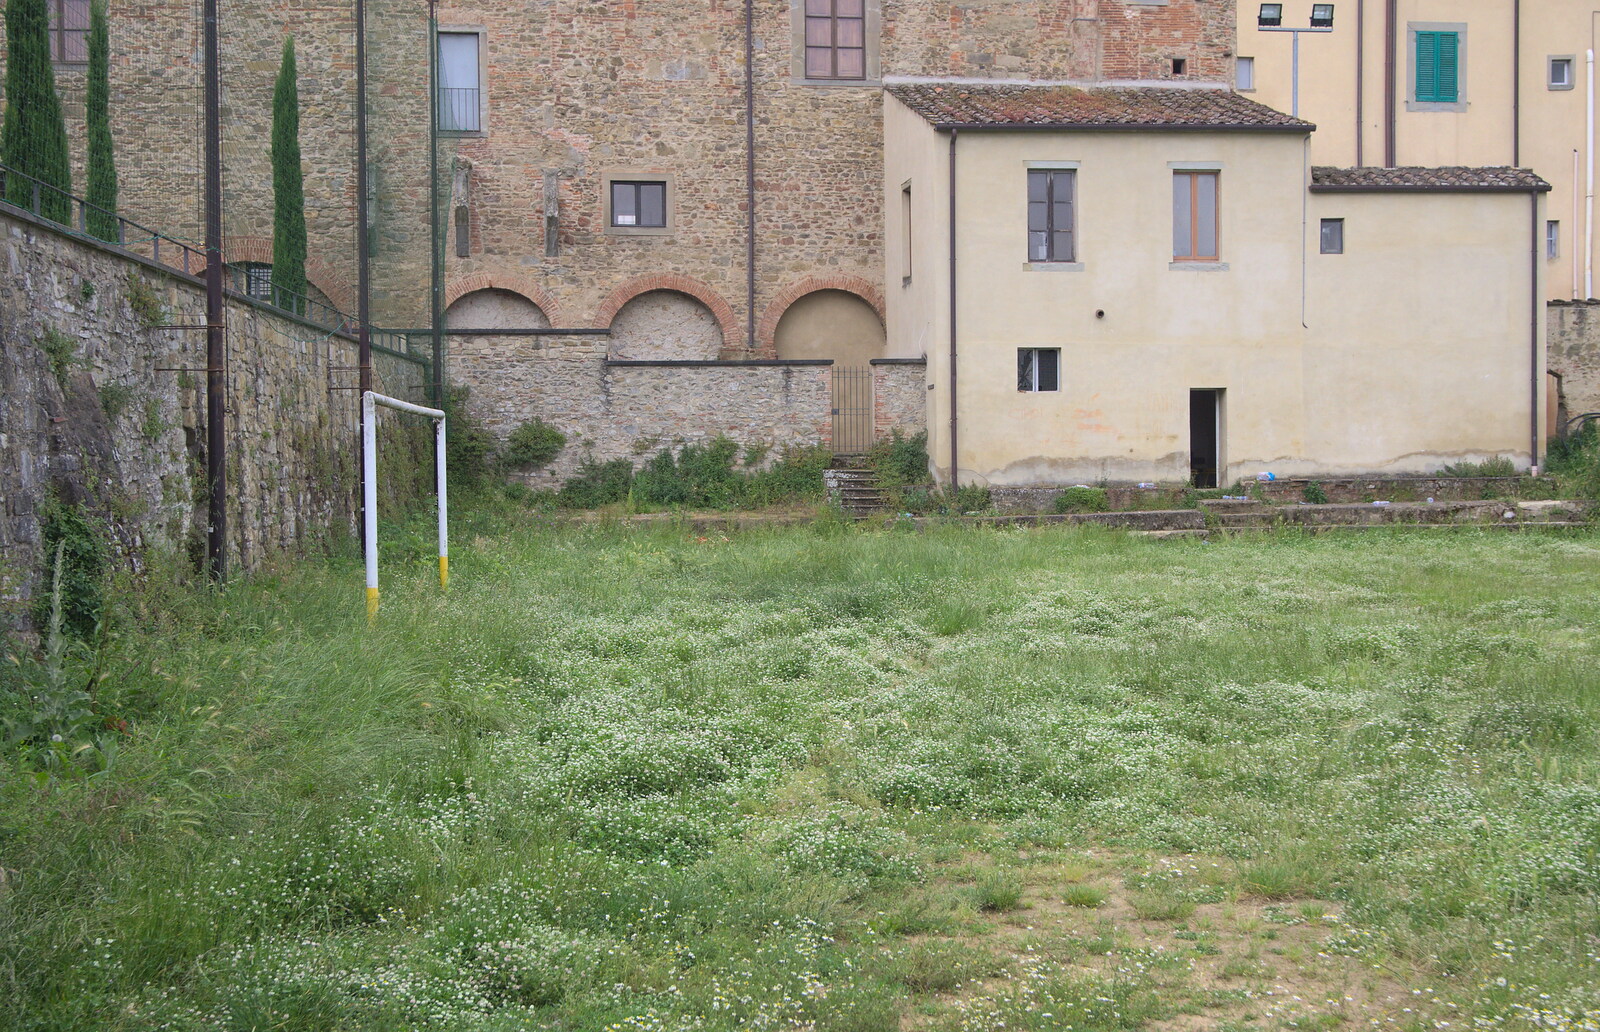 Marconi, Arezzo and the Sagra del Maccherone Festival, Battifolle, Tuscany - 9th June 2013: This football pitch is perhaps not quite match ready